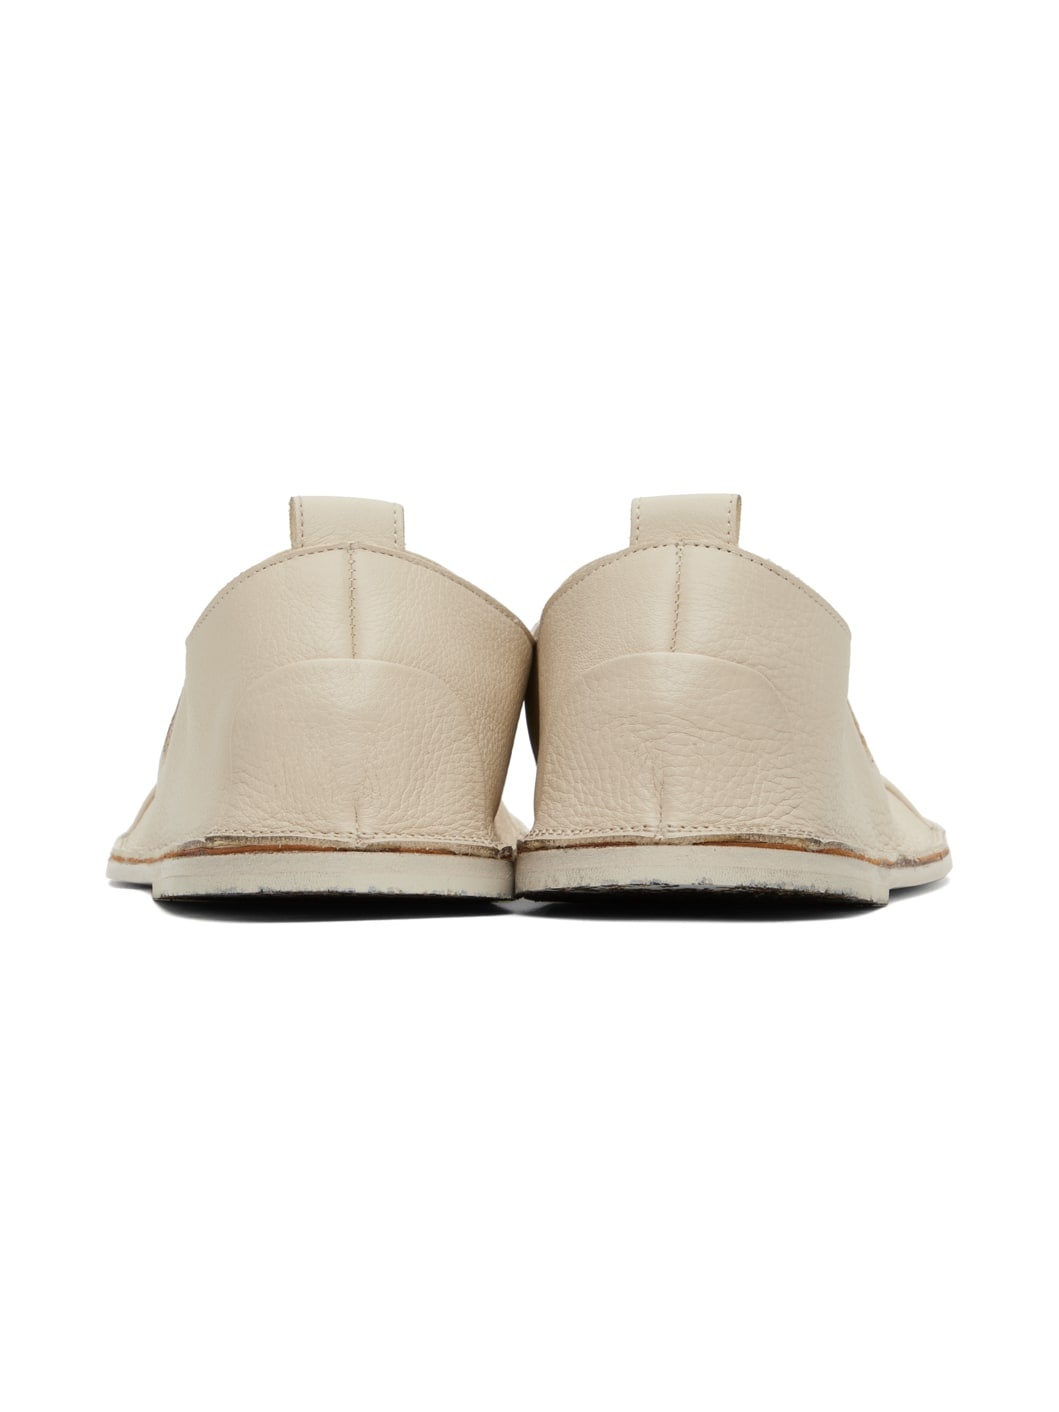 Off-White Strasacco Slippers - 2